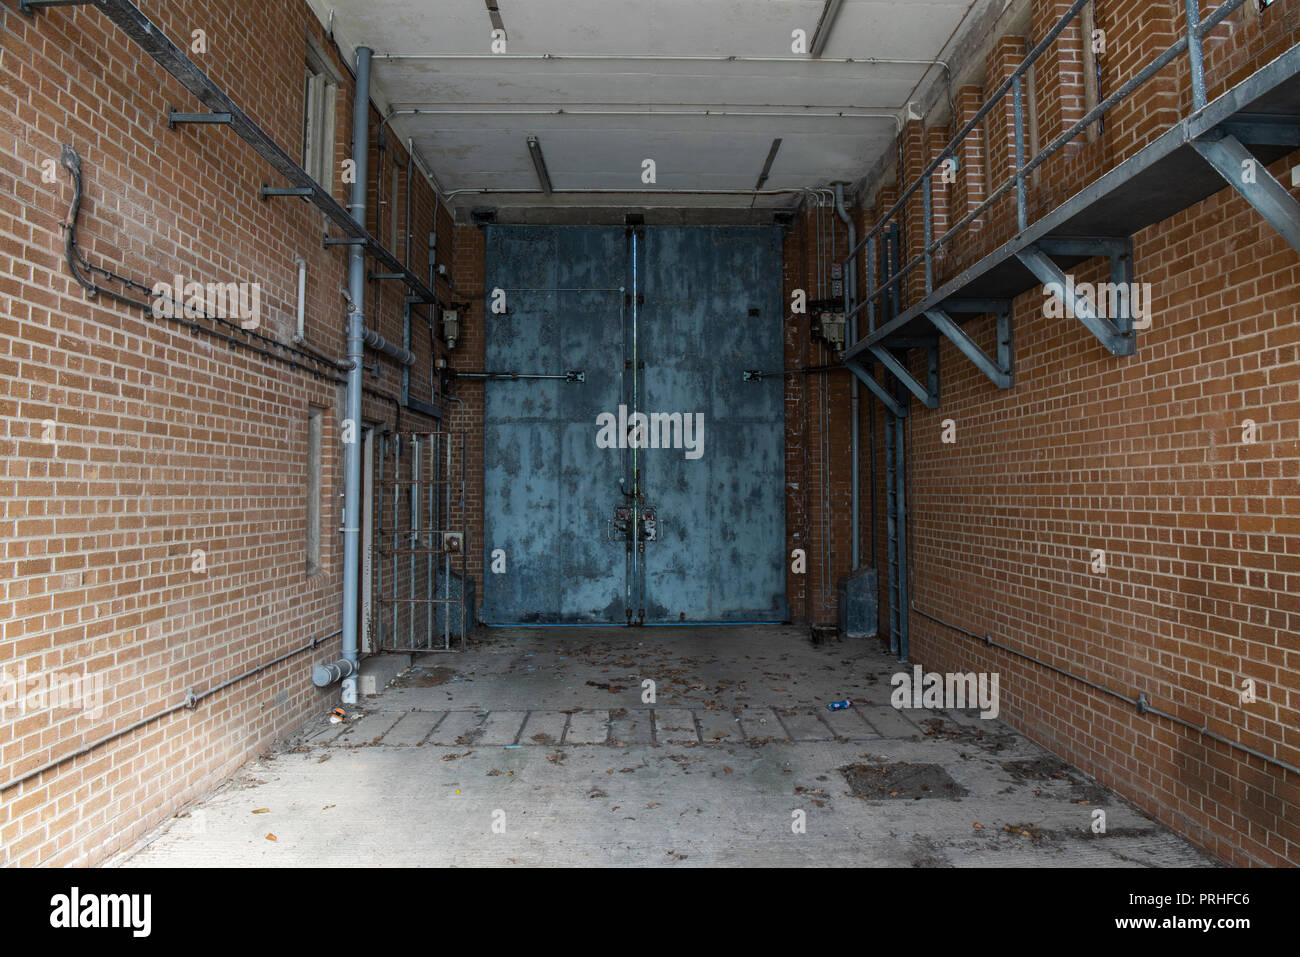 Hydraulically operated steel gates inside the vehicle bay of a prison. Stock Photo